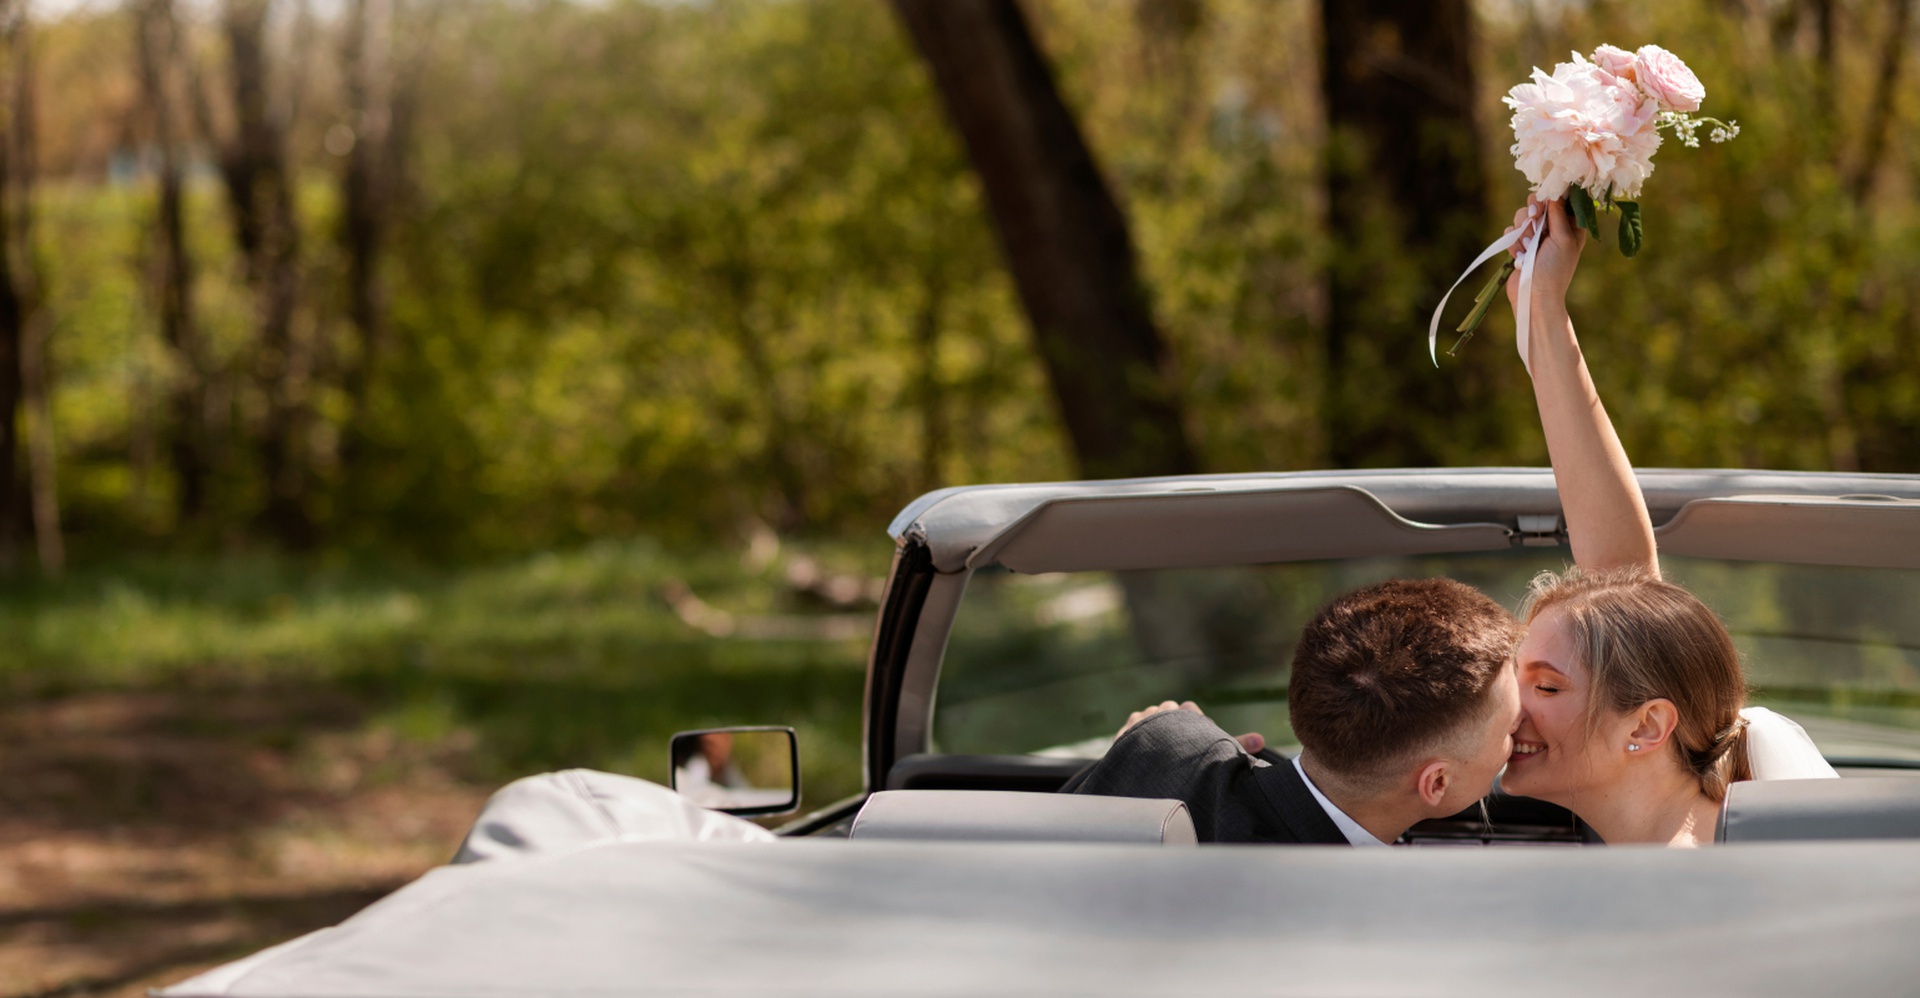 What are the benefits of renting a car for a wedding?